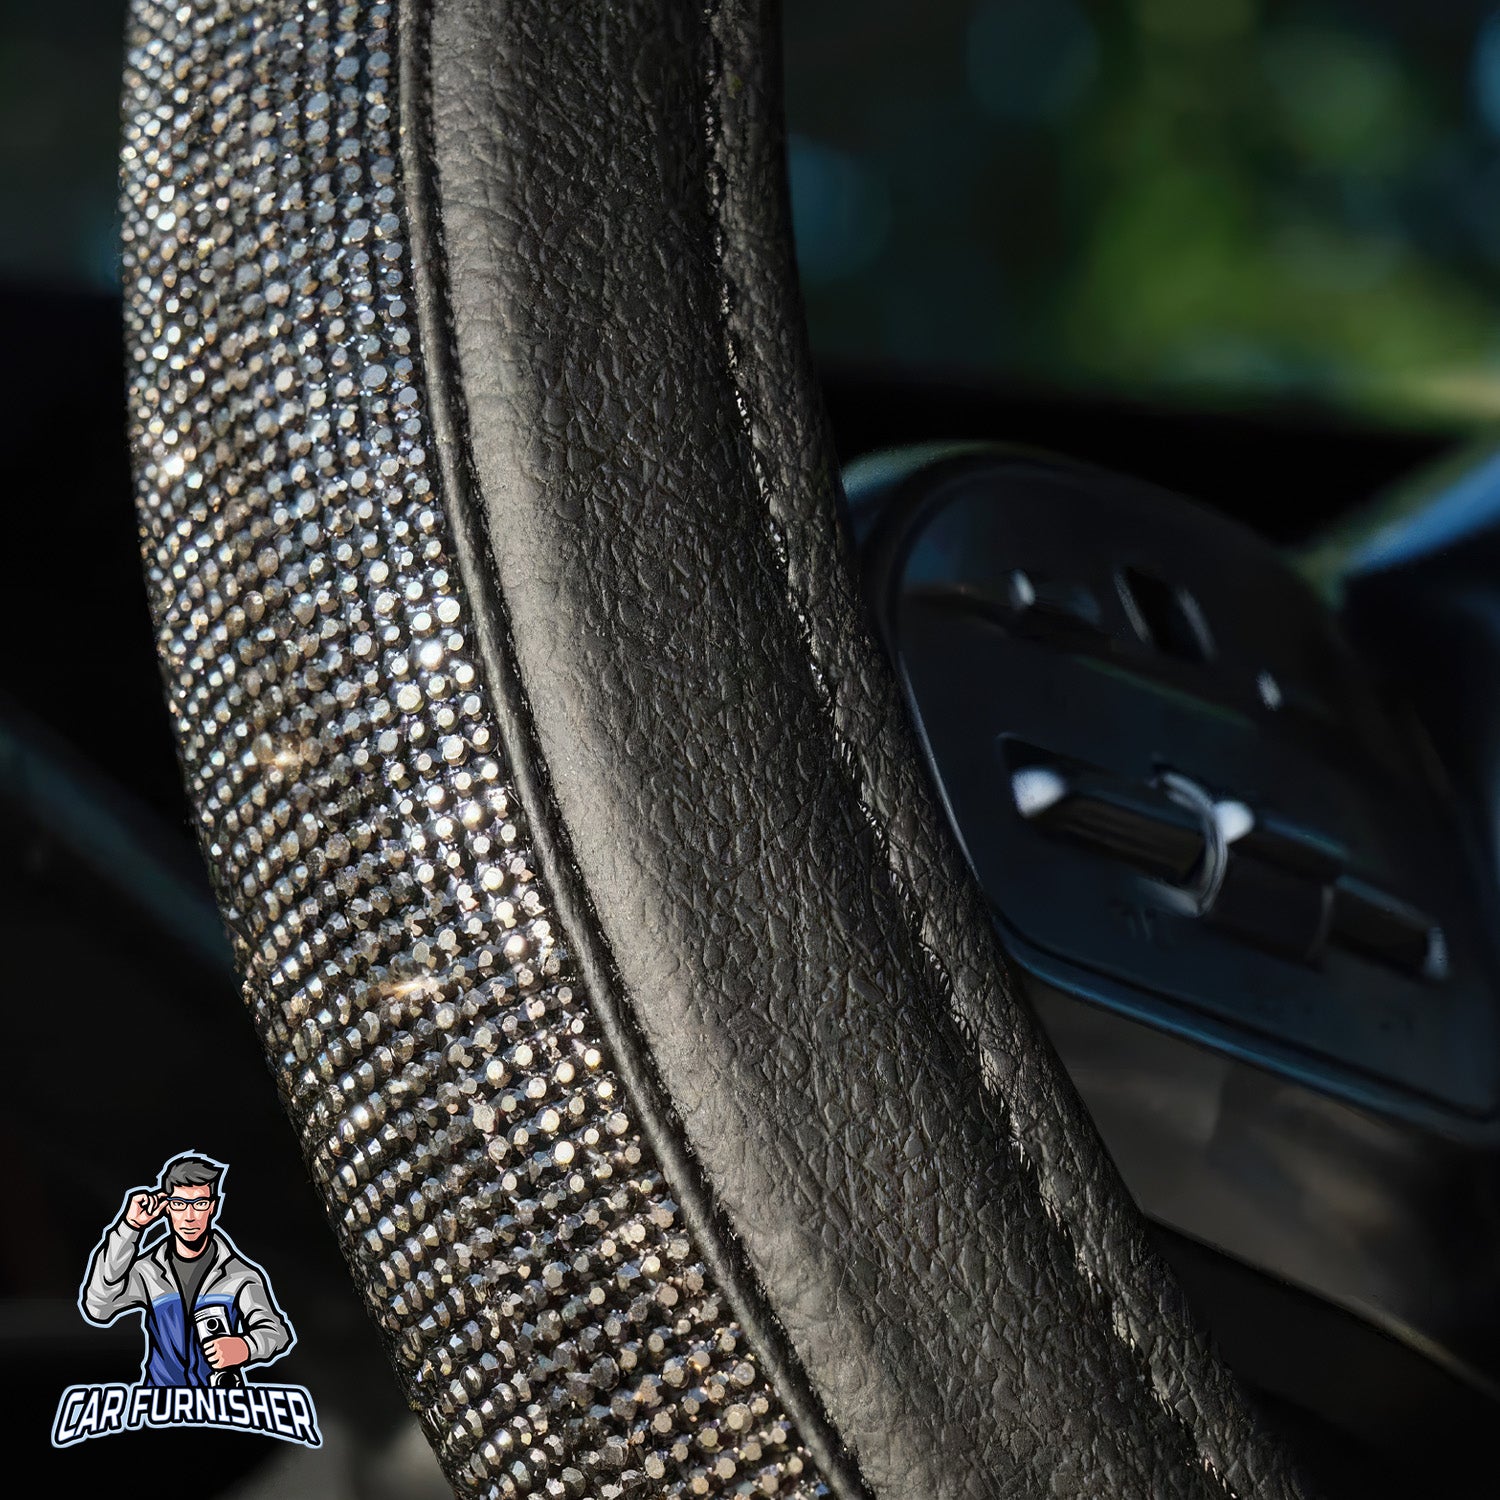 Sparkling Luxury Bling Steering Wheel Cover | Swarovski Crystals Gray Leather & Fabric